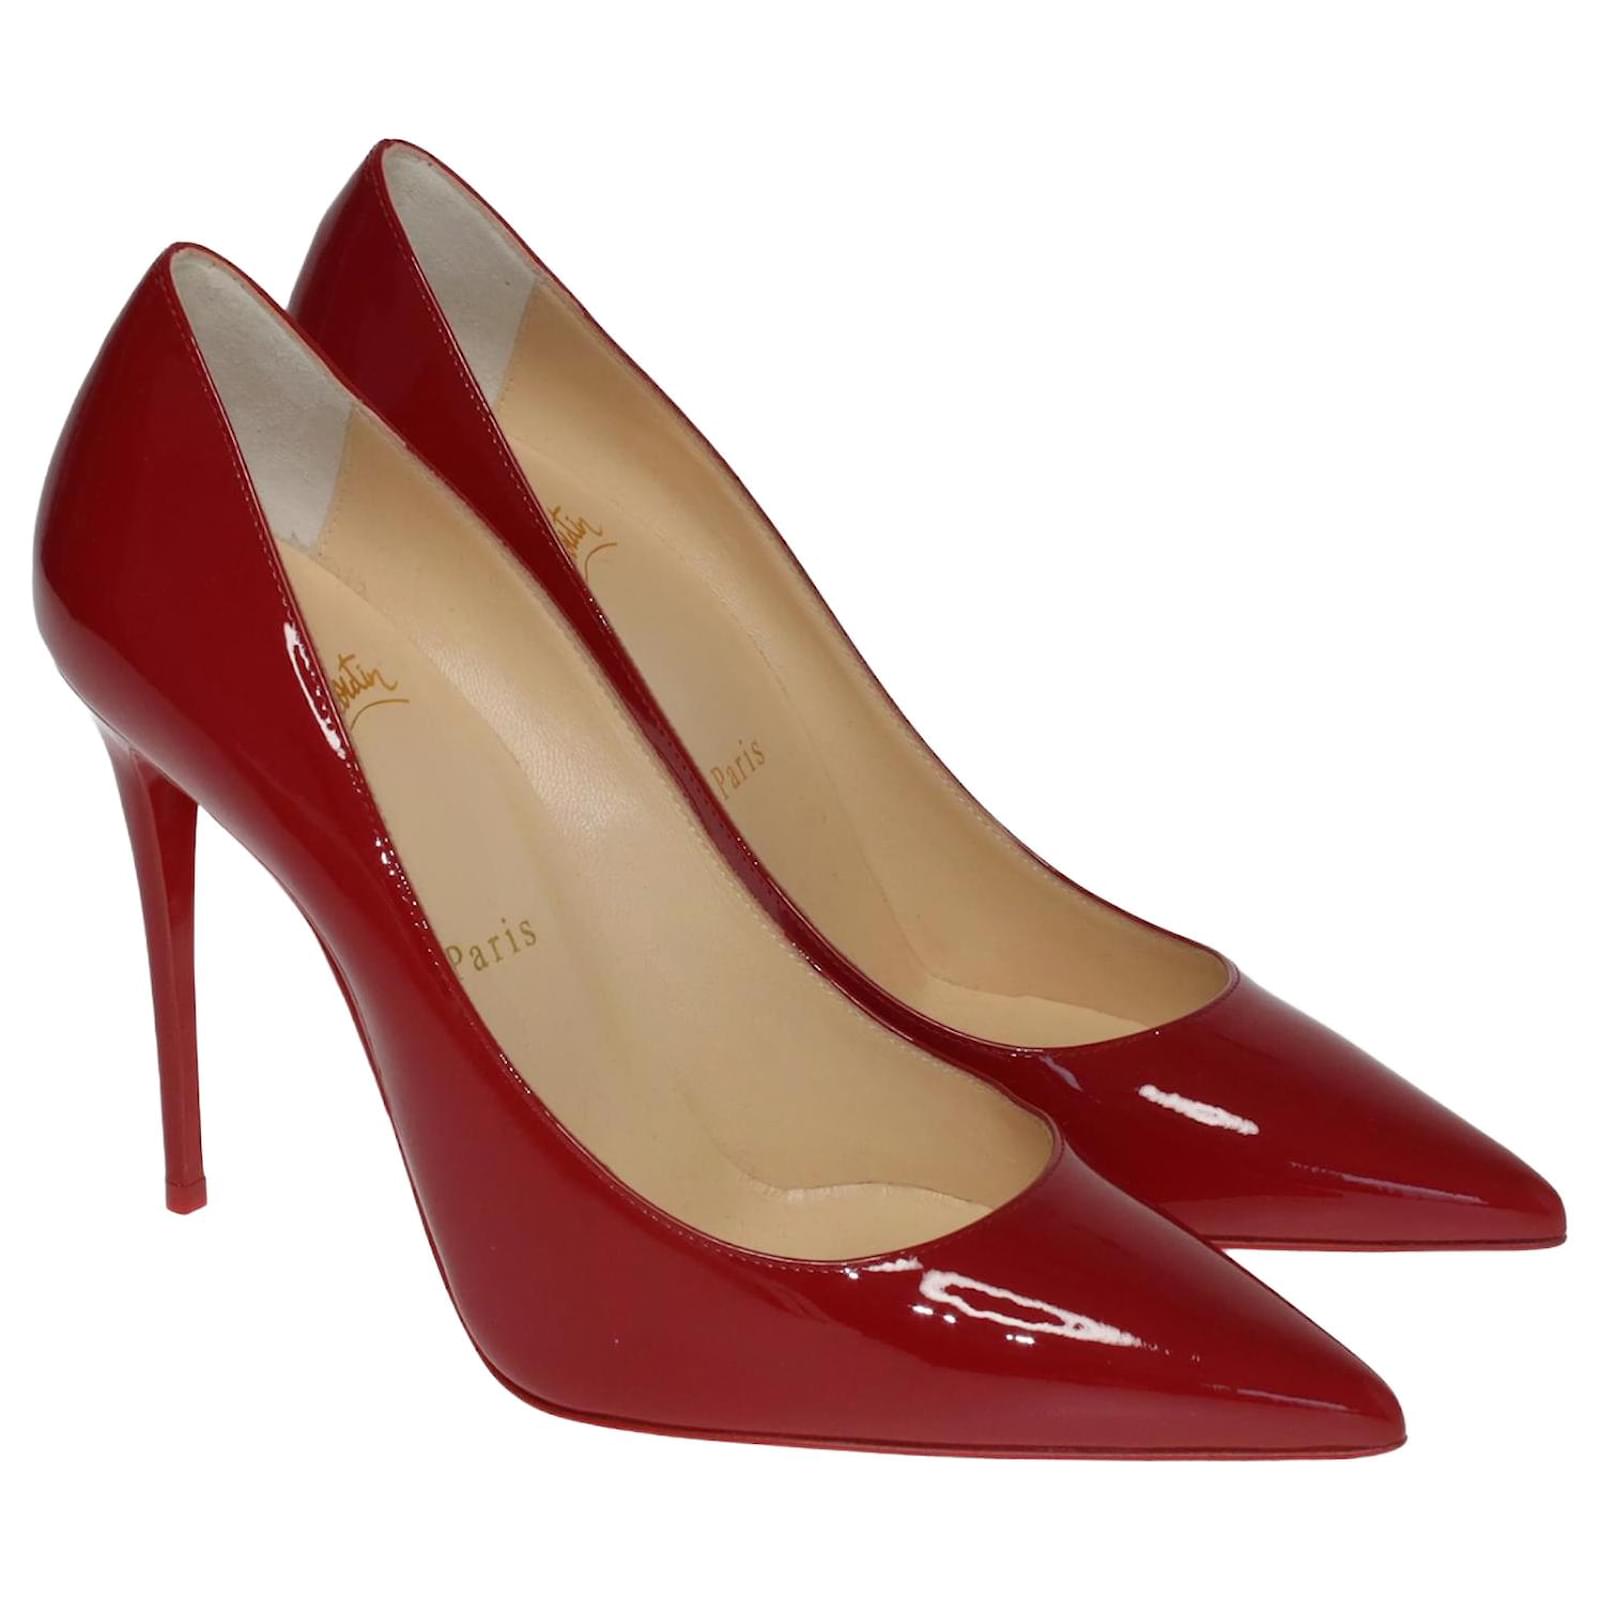 Christian Louboutin Kate 100 Patent Pump in Red